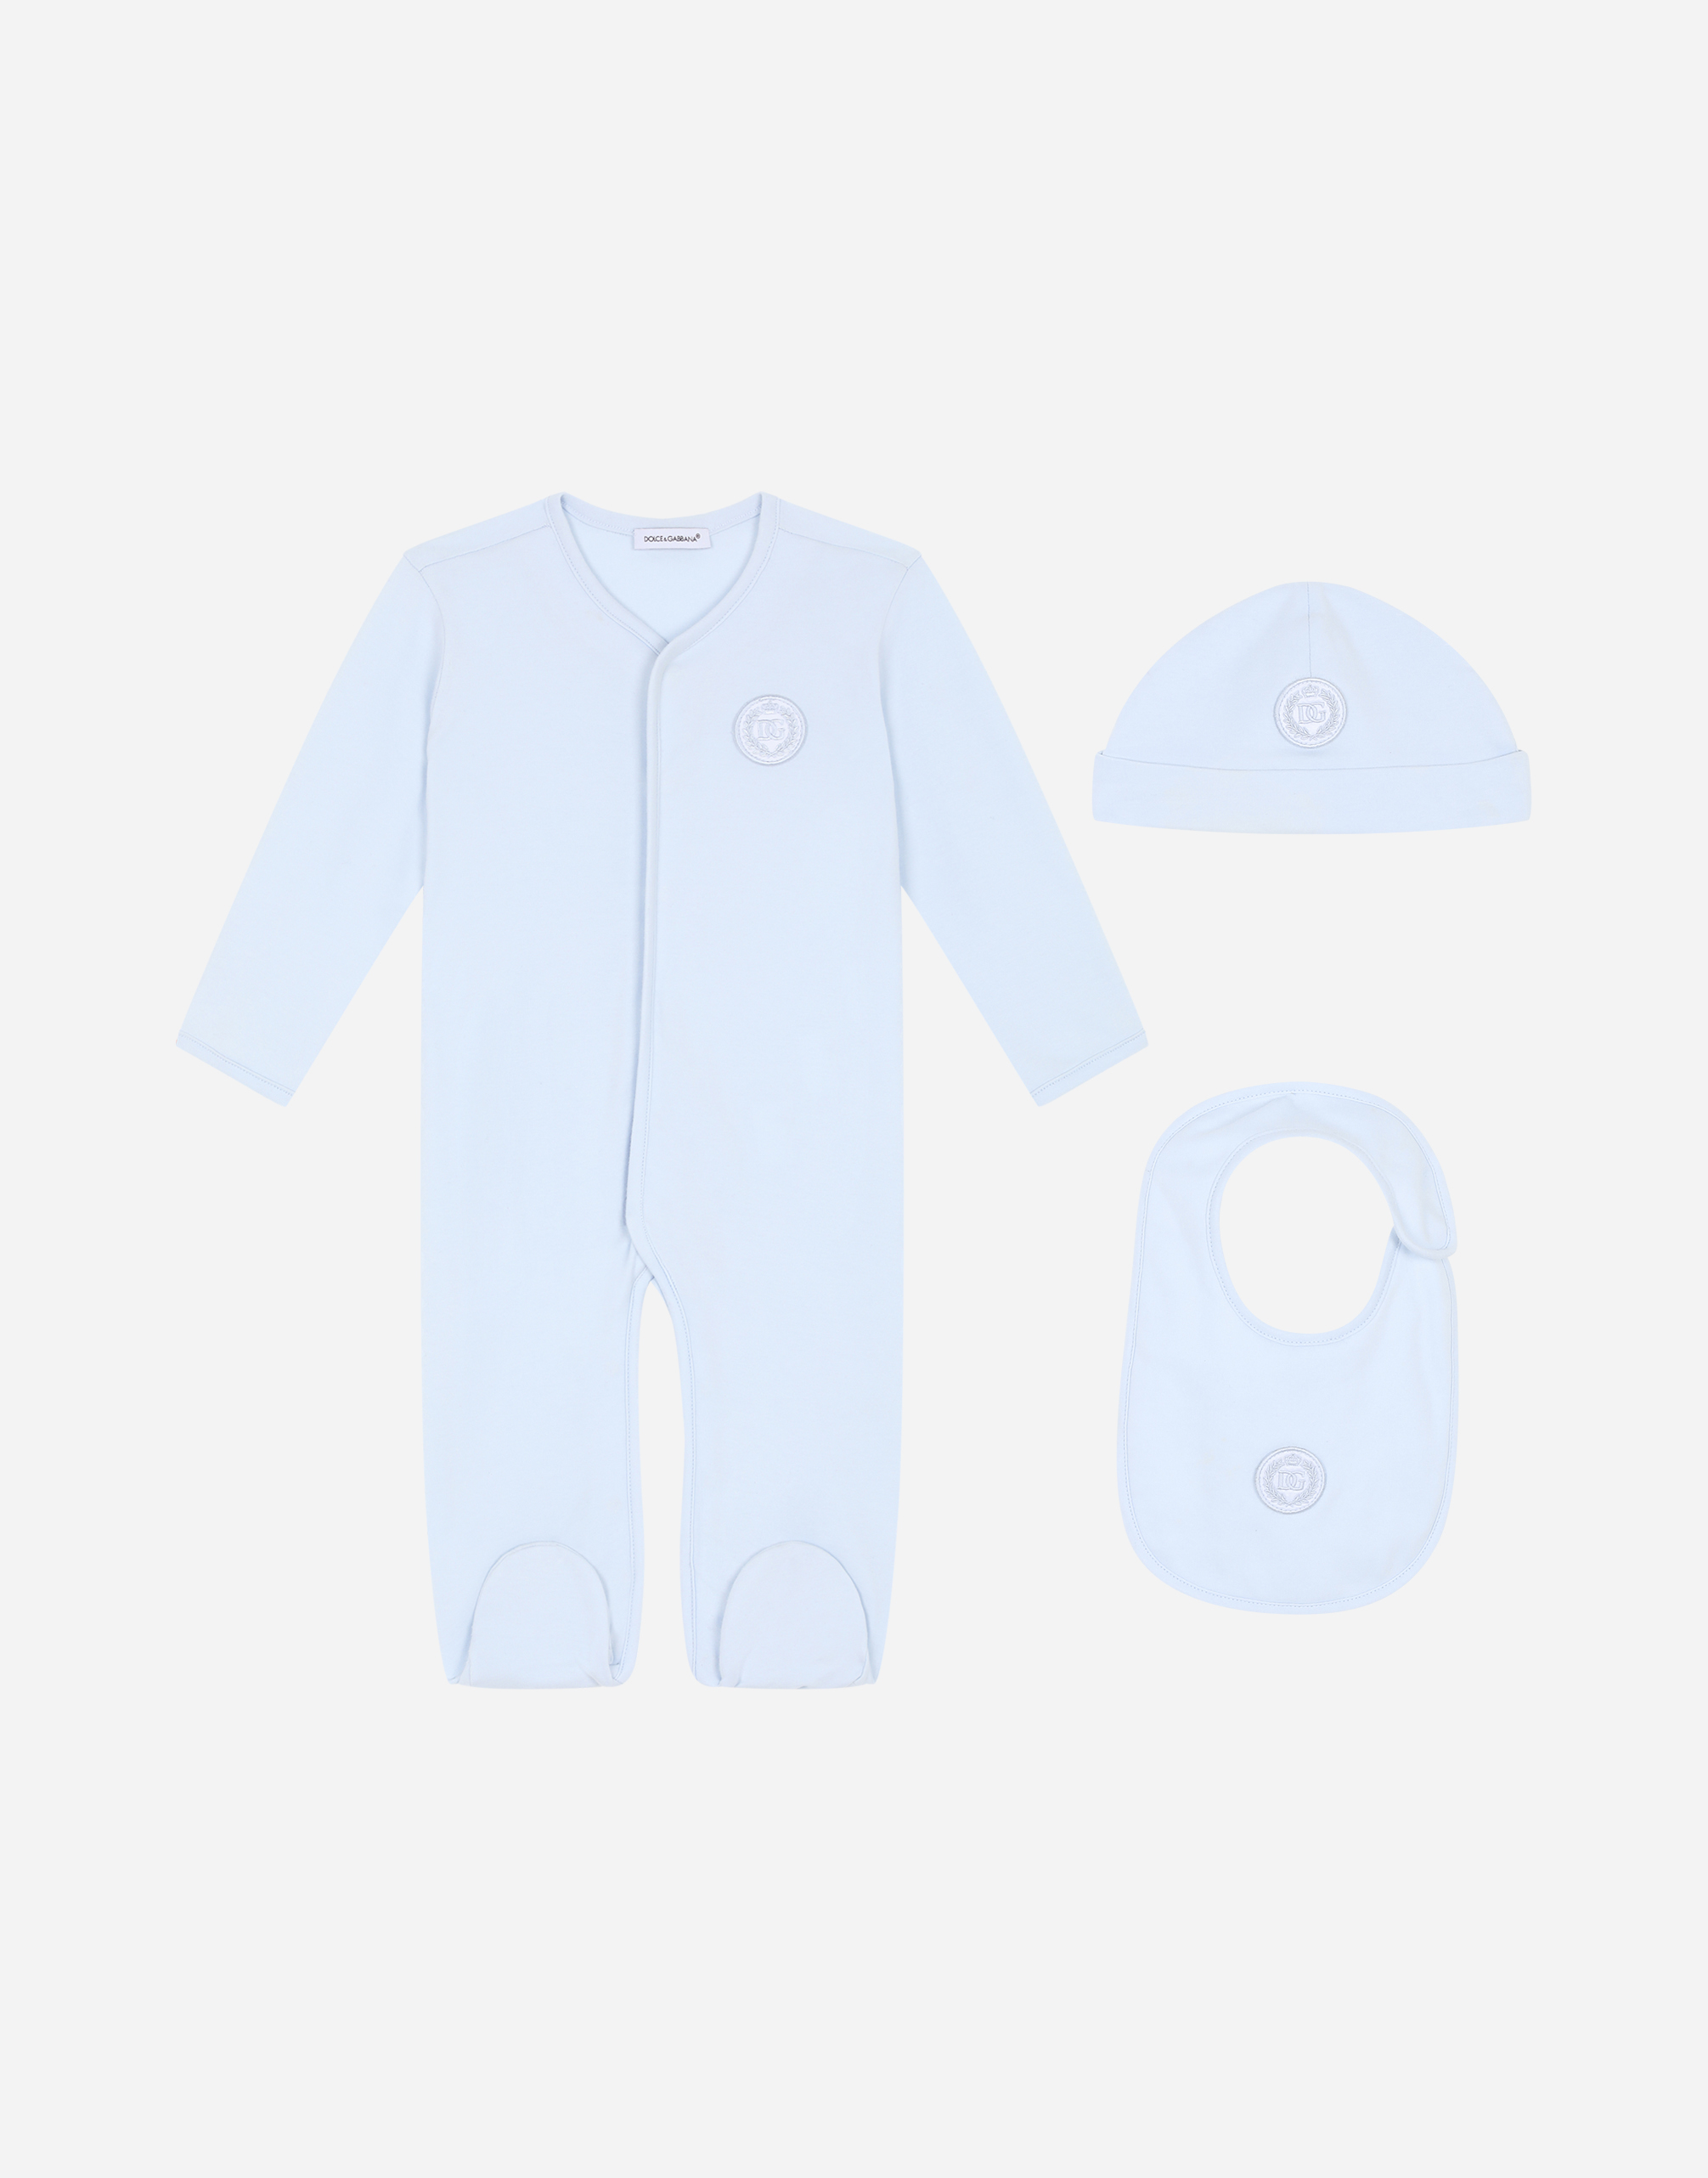 3-piece jersey gift set with DG laurel patch in Azure